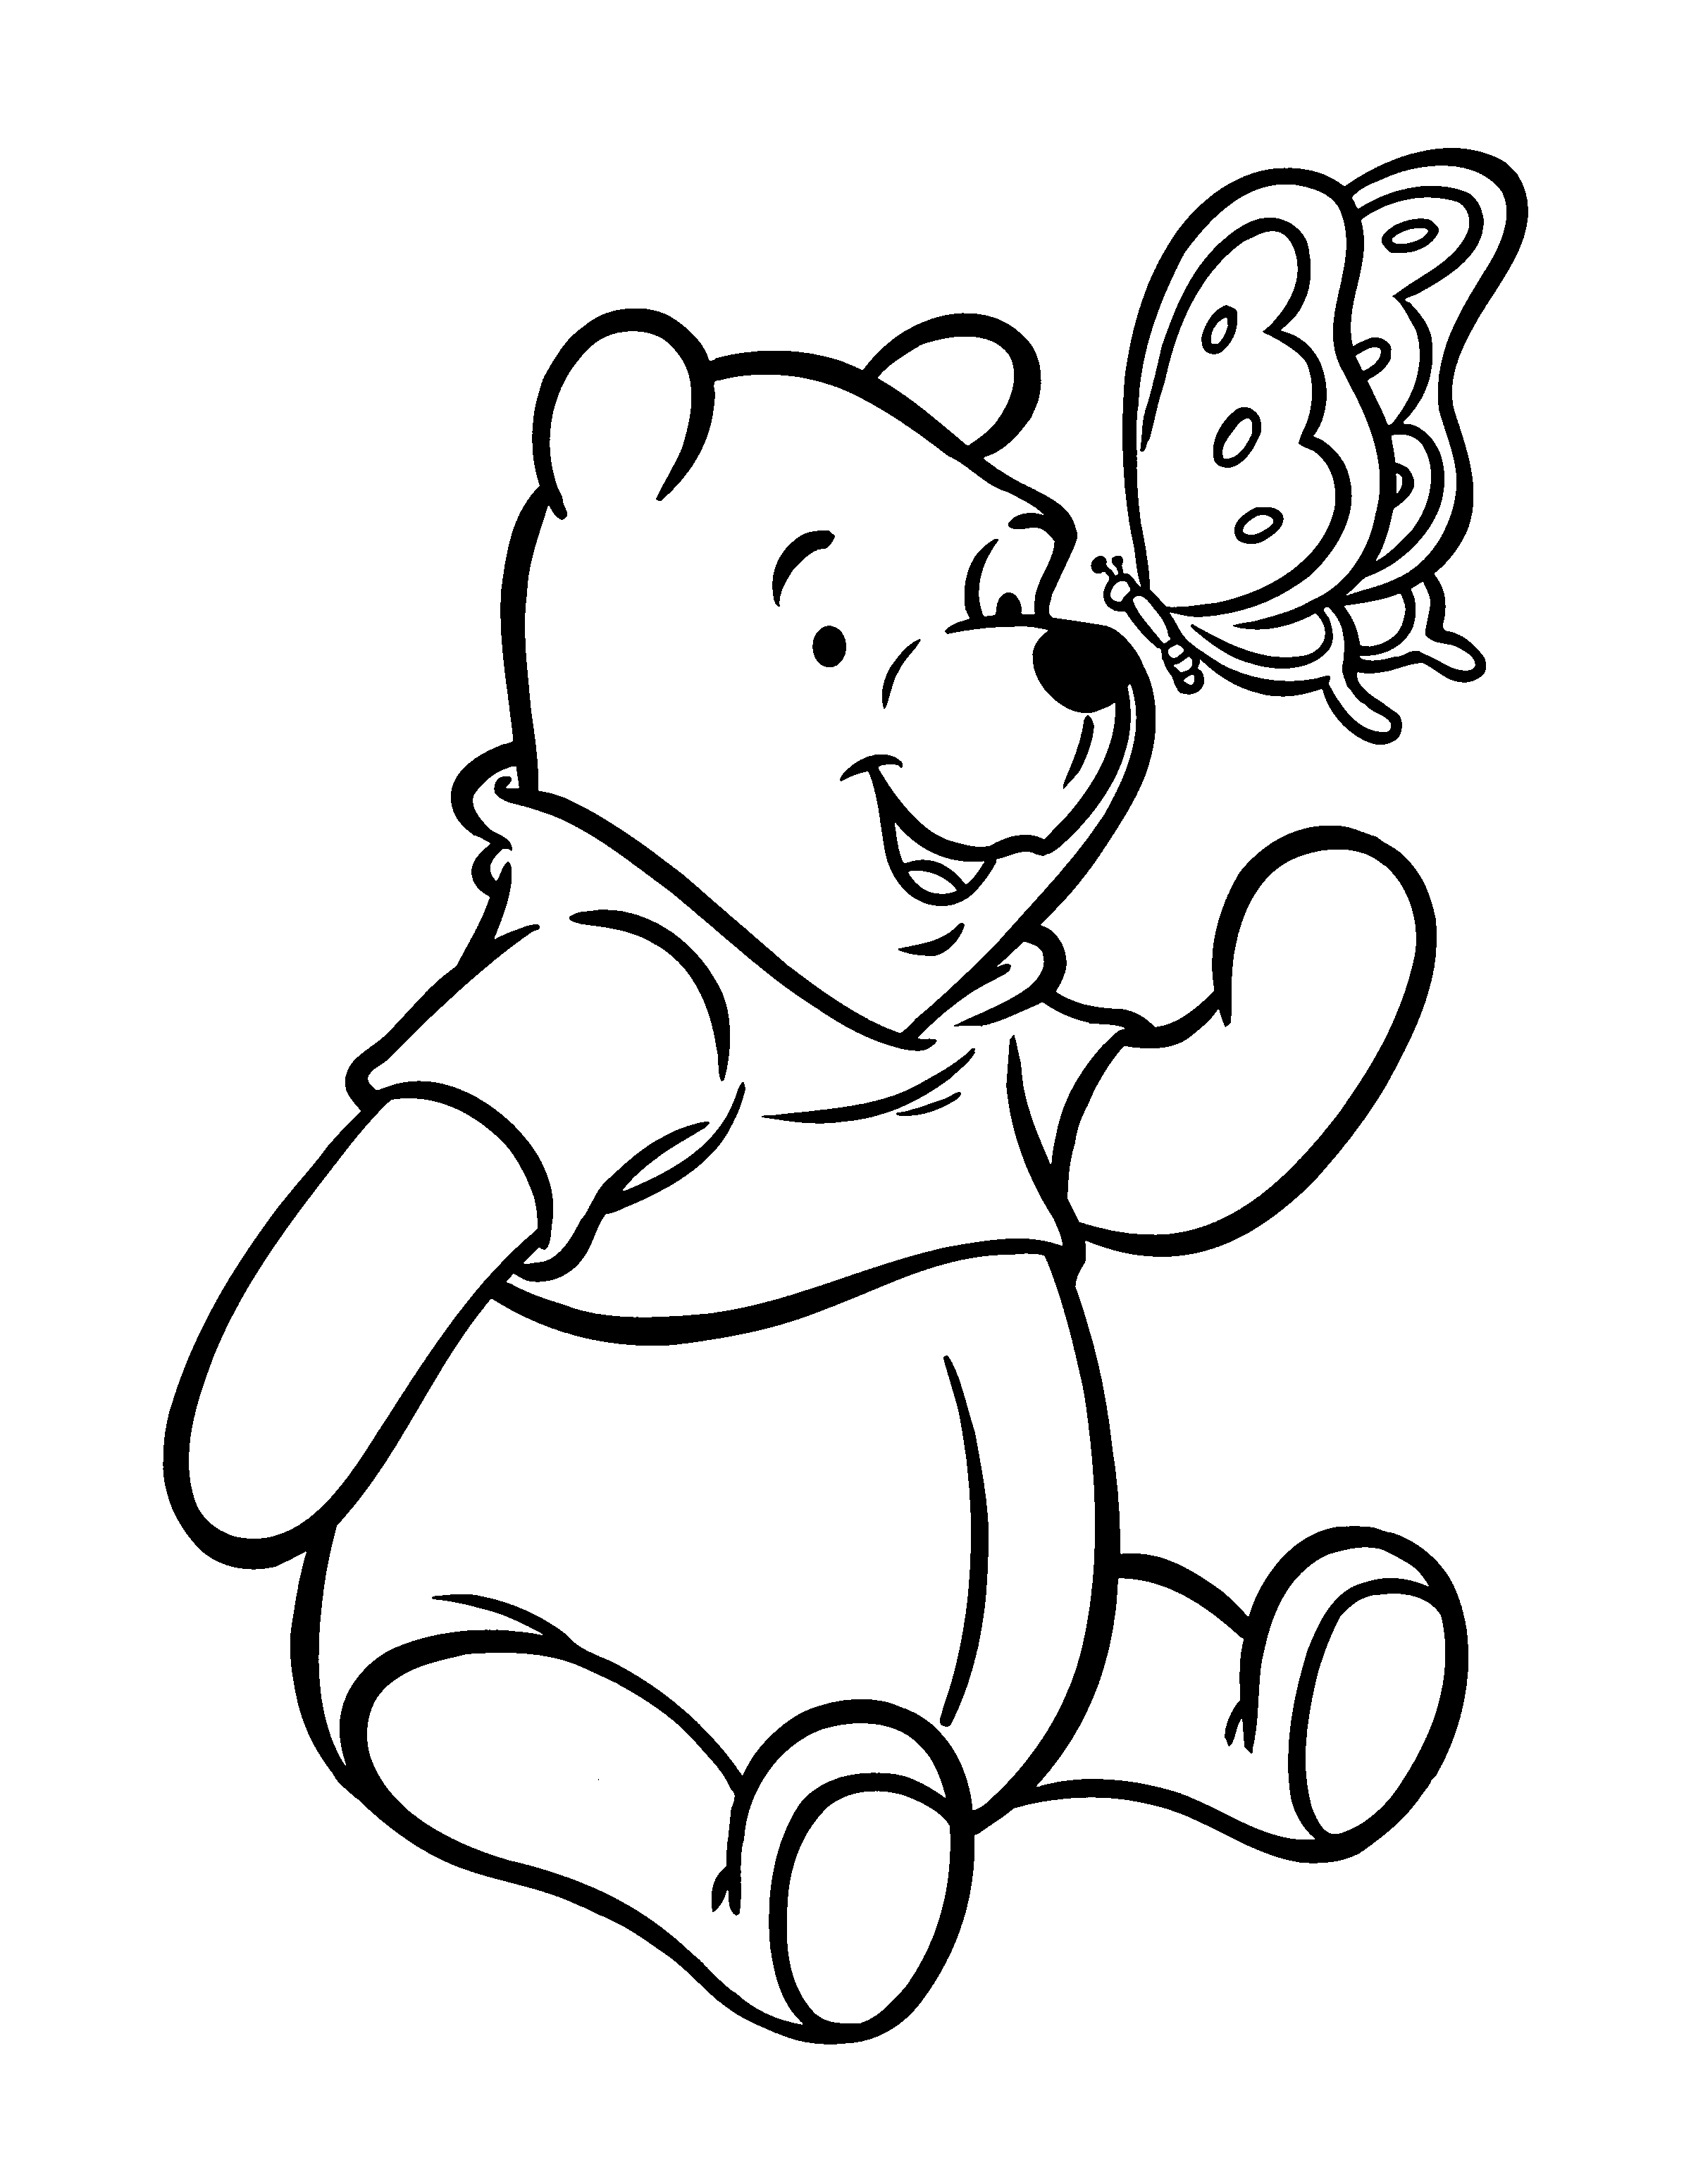 animated-coloring-pages-winnie-the-pooh-image-0106